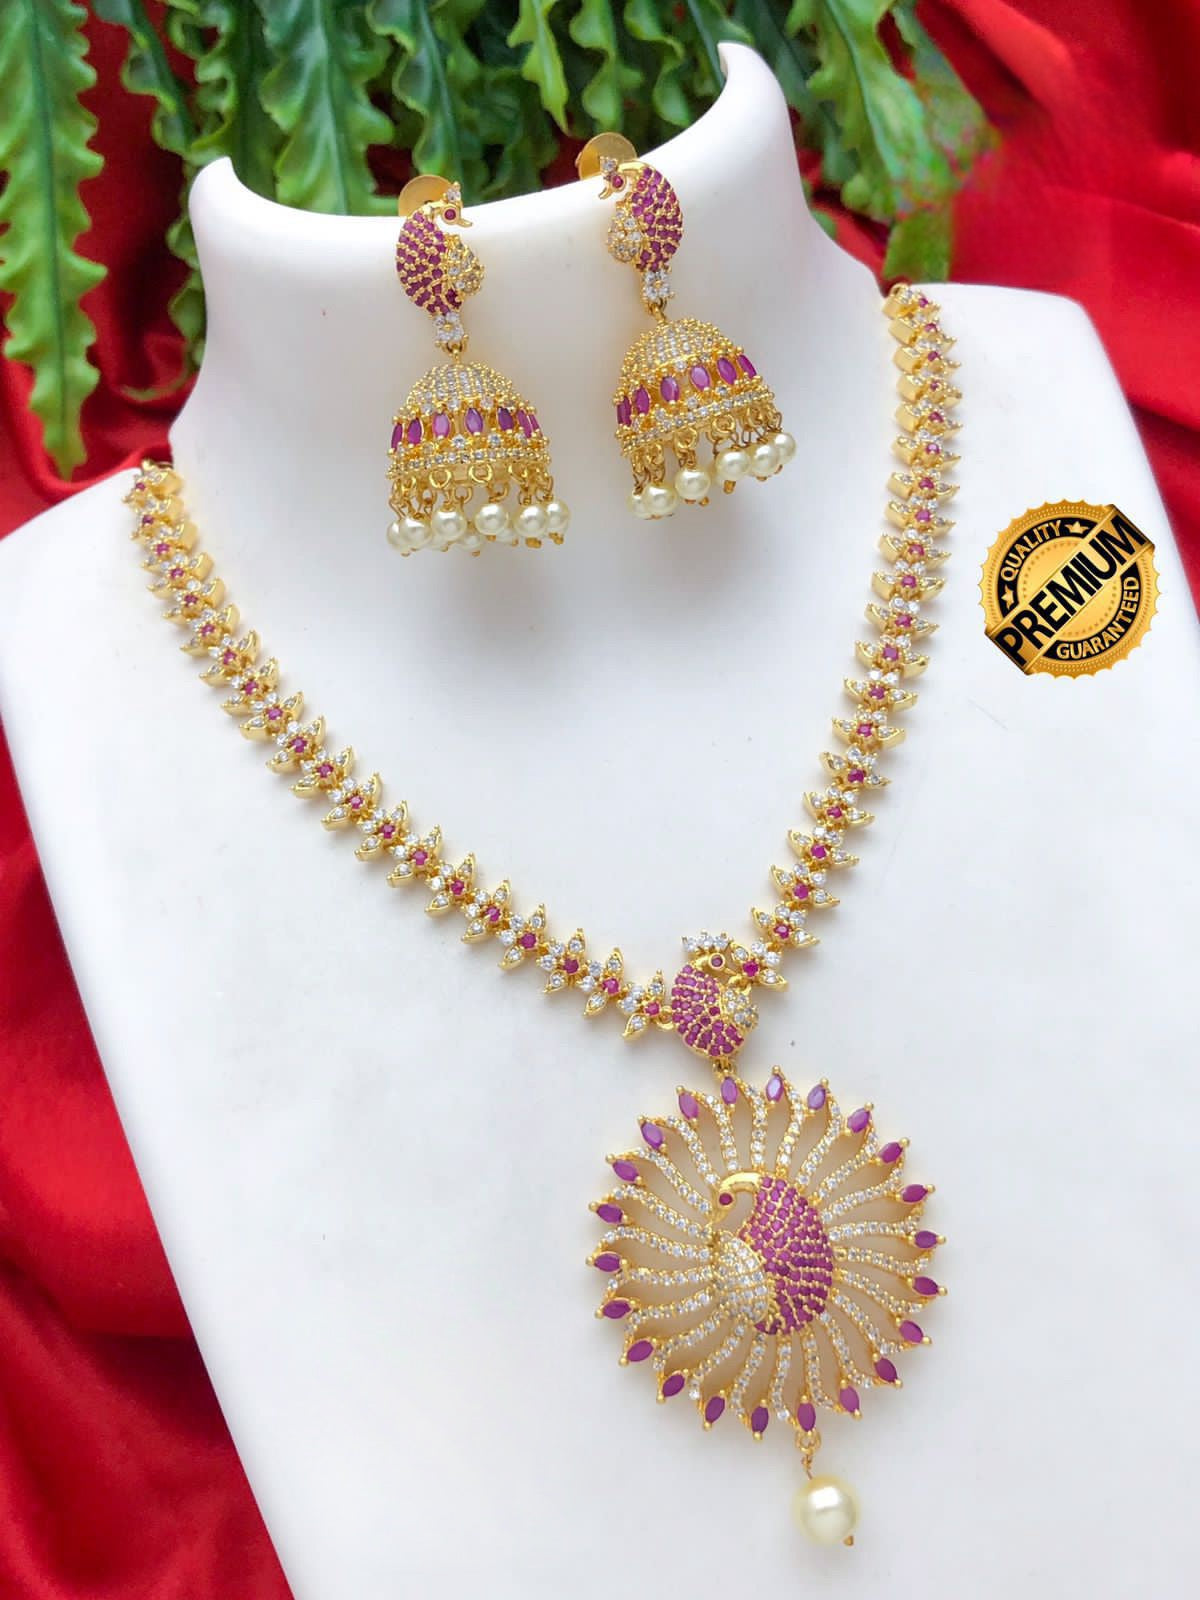 Gold plated American Diamond Dancing Peacock Pendant Necklace Jhumka Earring set|South Indian jewelry|AD necklace set| Ruby Emerald jewelry